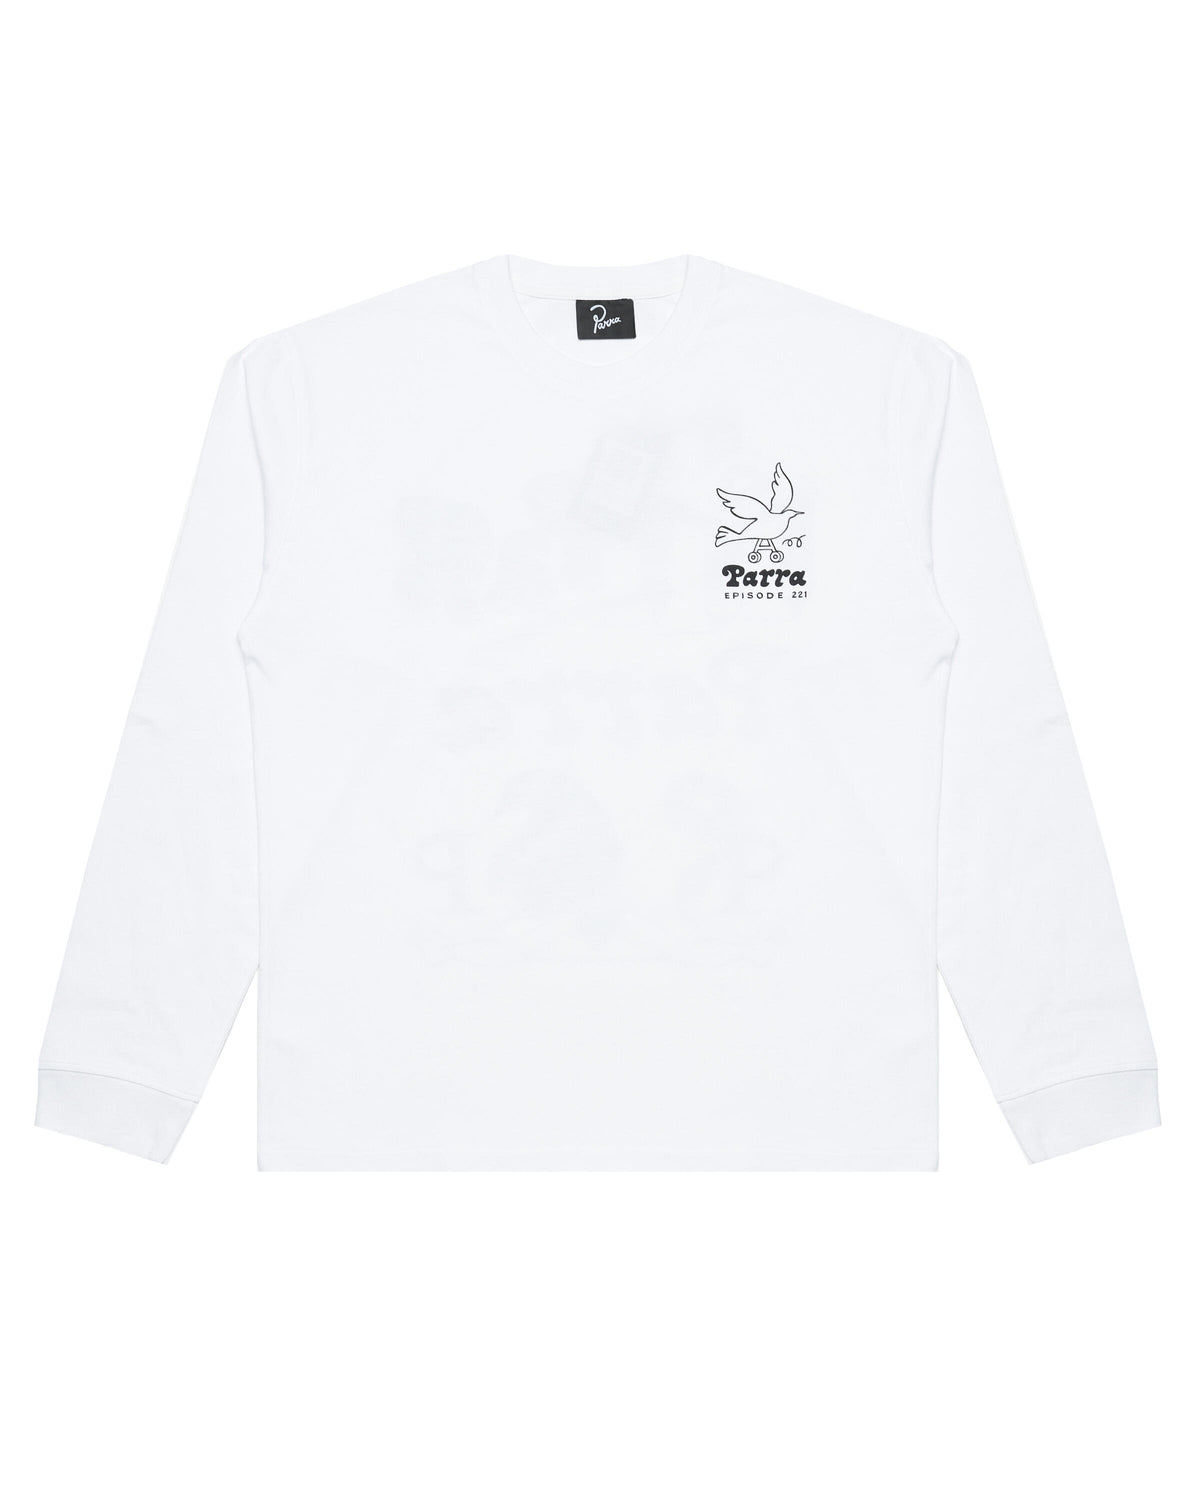 by Parra chair pencil long sleeve t-shirt